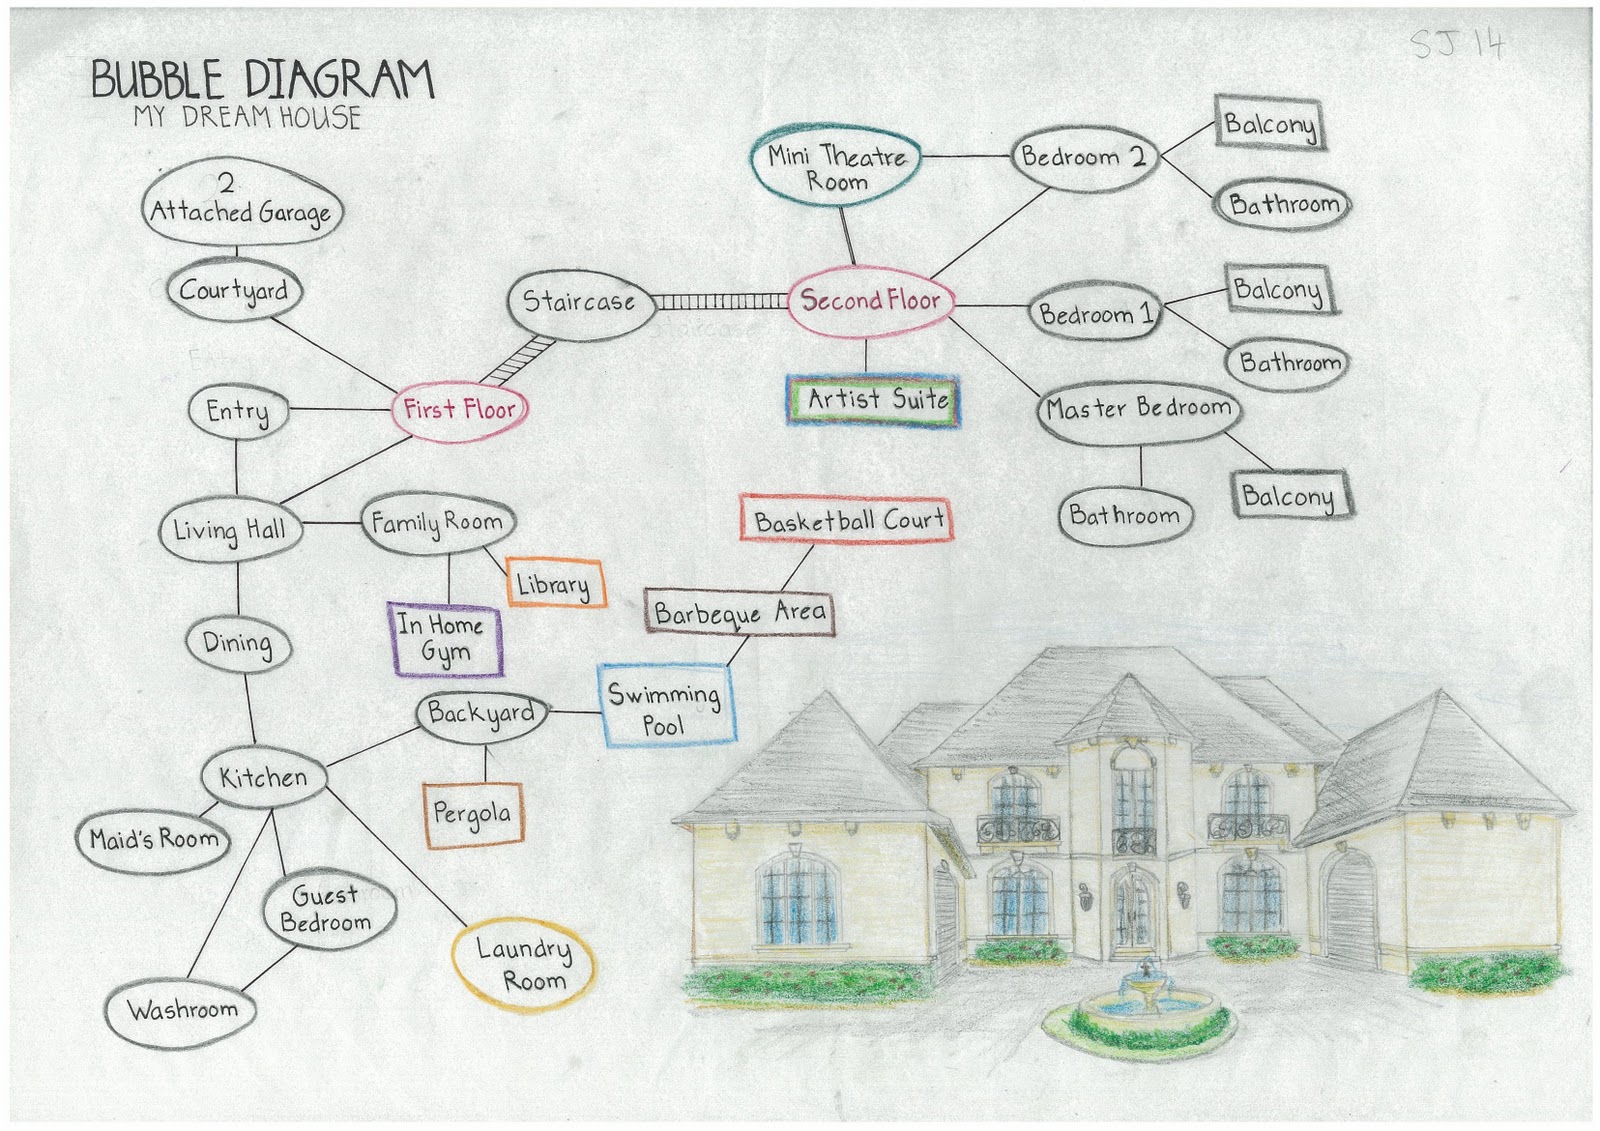 Harley's Archi Assignment Life: SJ14- Bubble Diagram of your Dream House